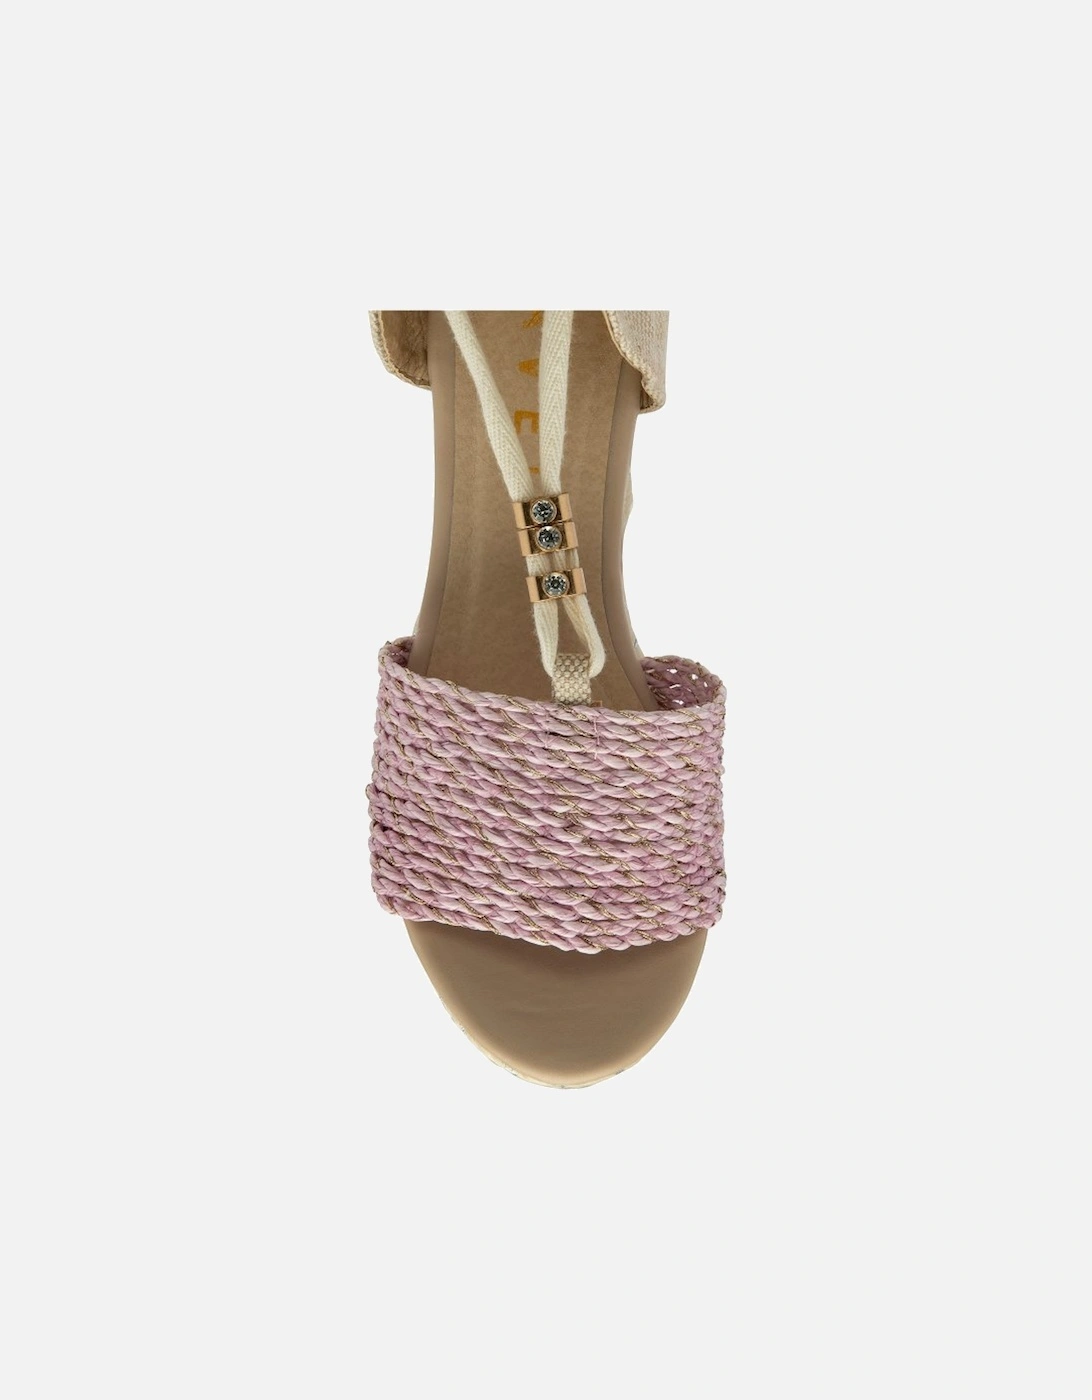 Forres Womens Espadrille Wedges